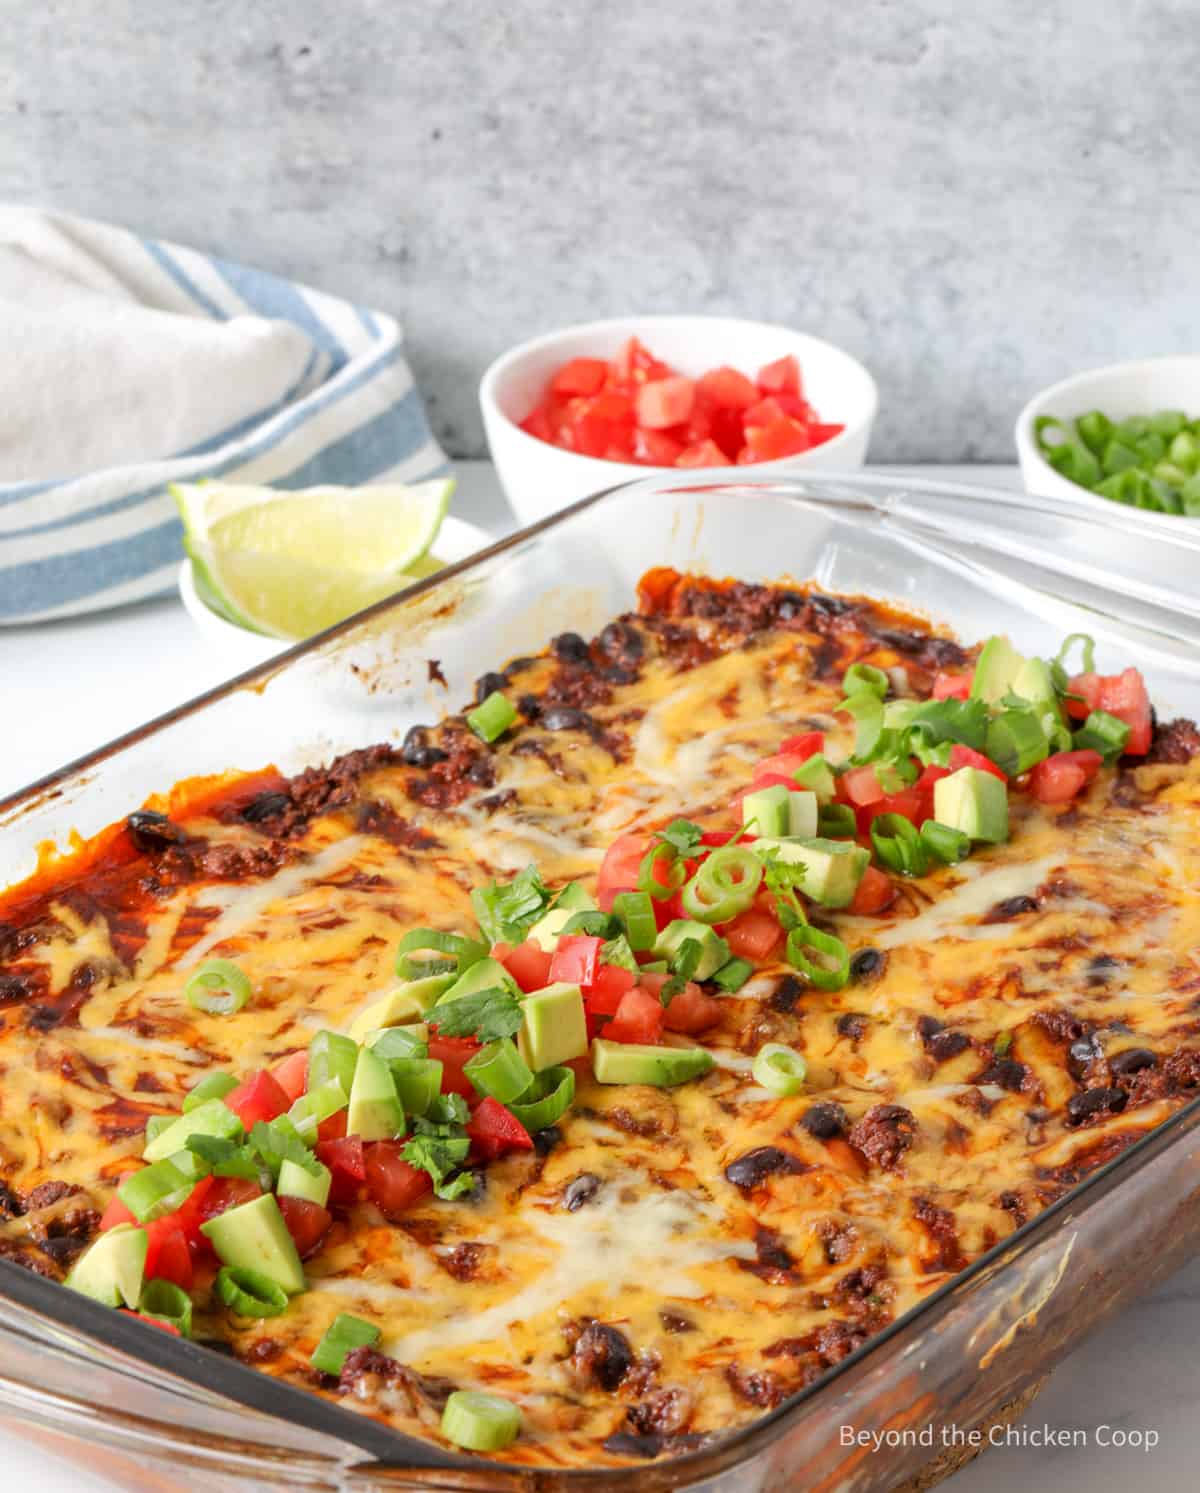 Enchilada casserole garnished with tomatoes and green onions.